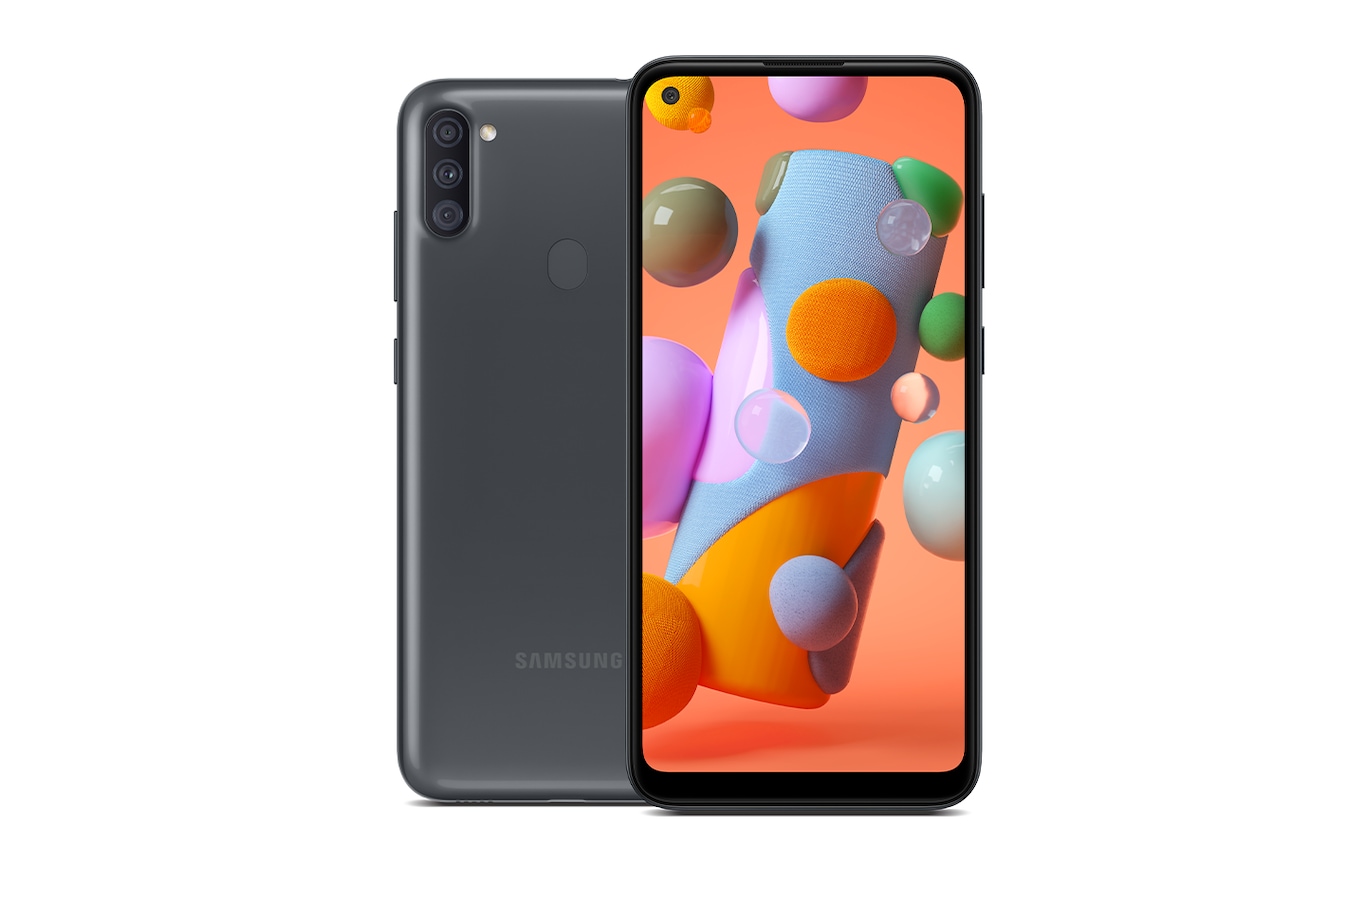 Introducing the Galaxy A11